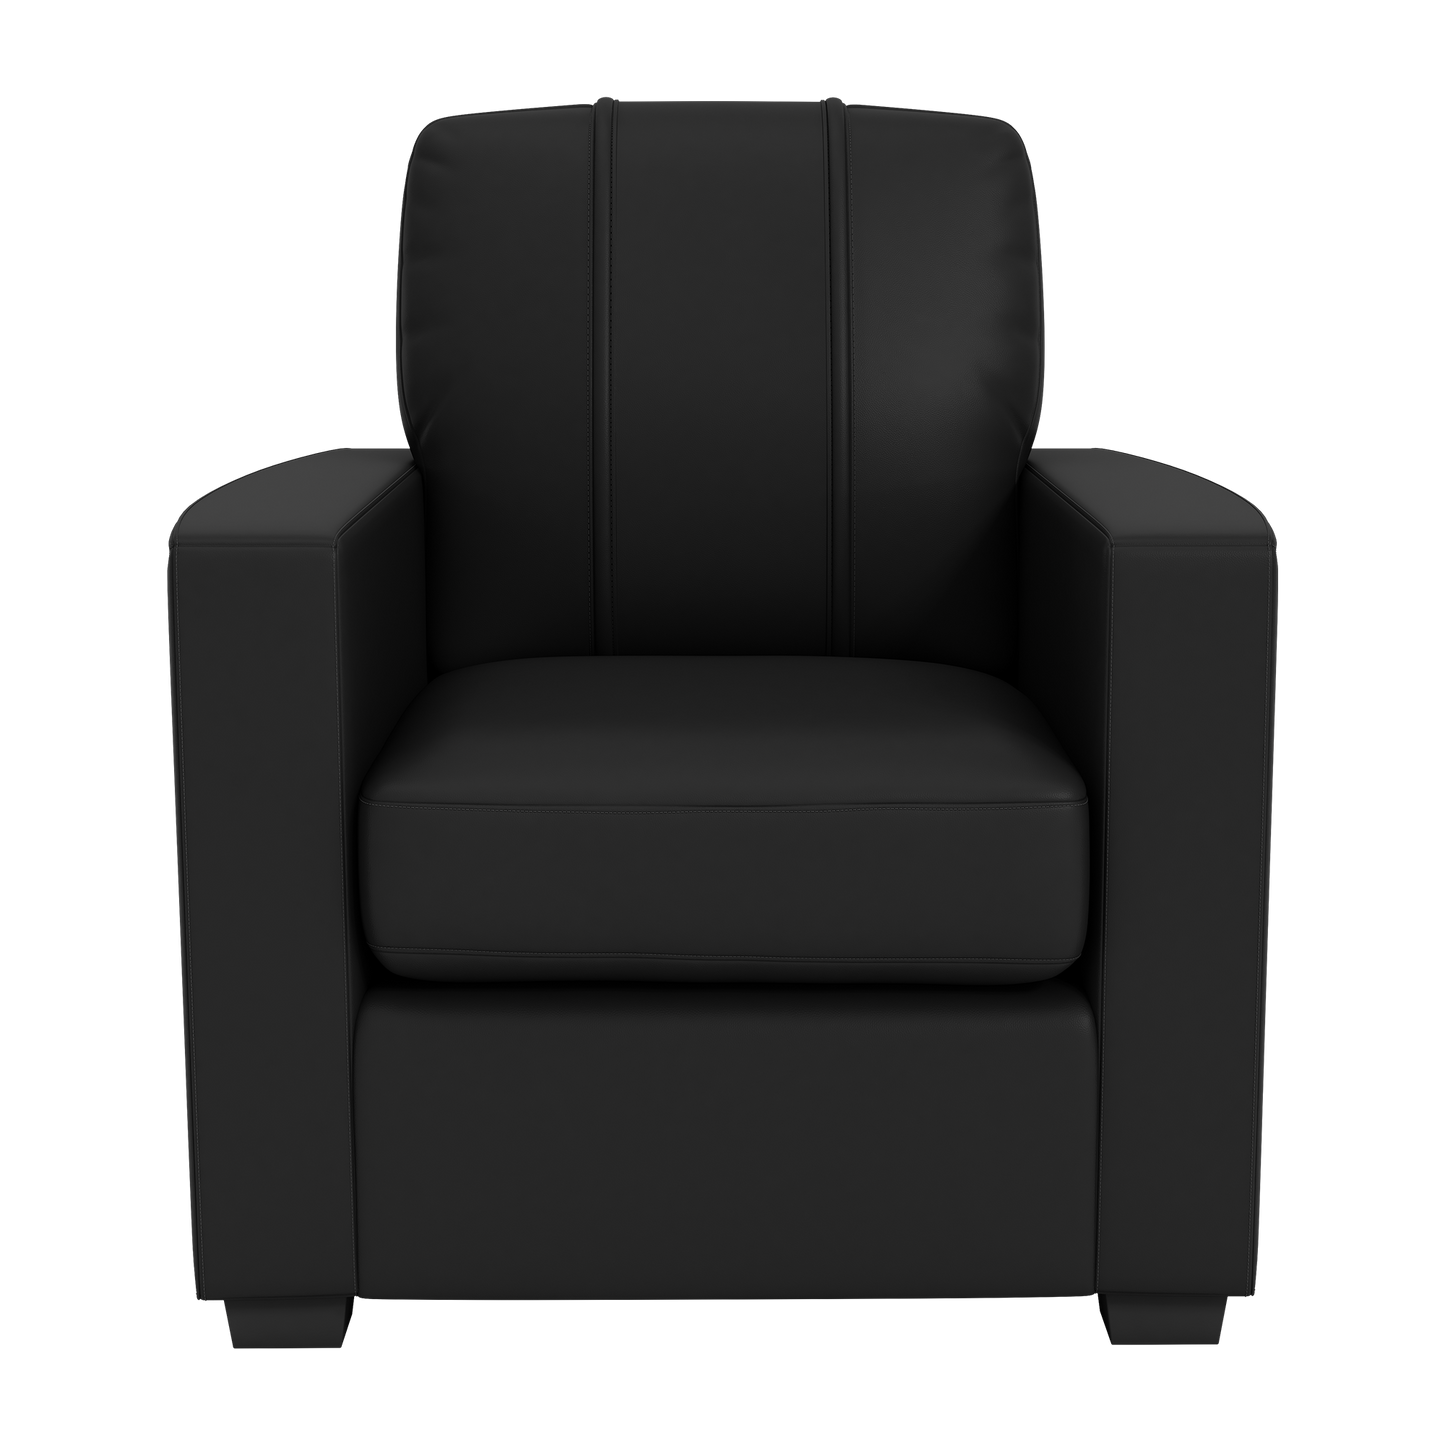 Silver Club Chair with Texas Rangers Secondary